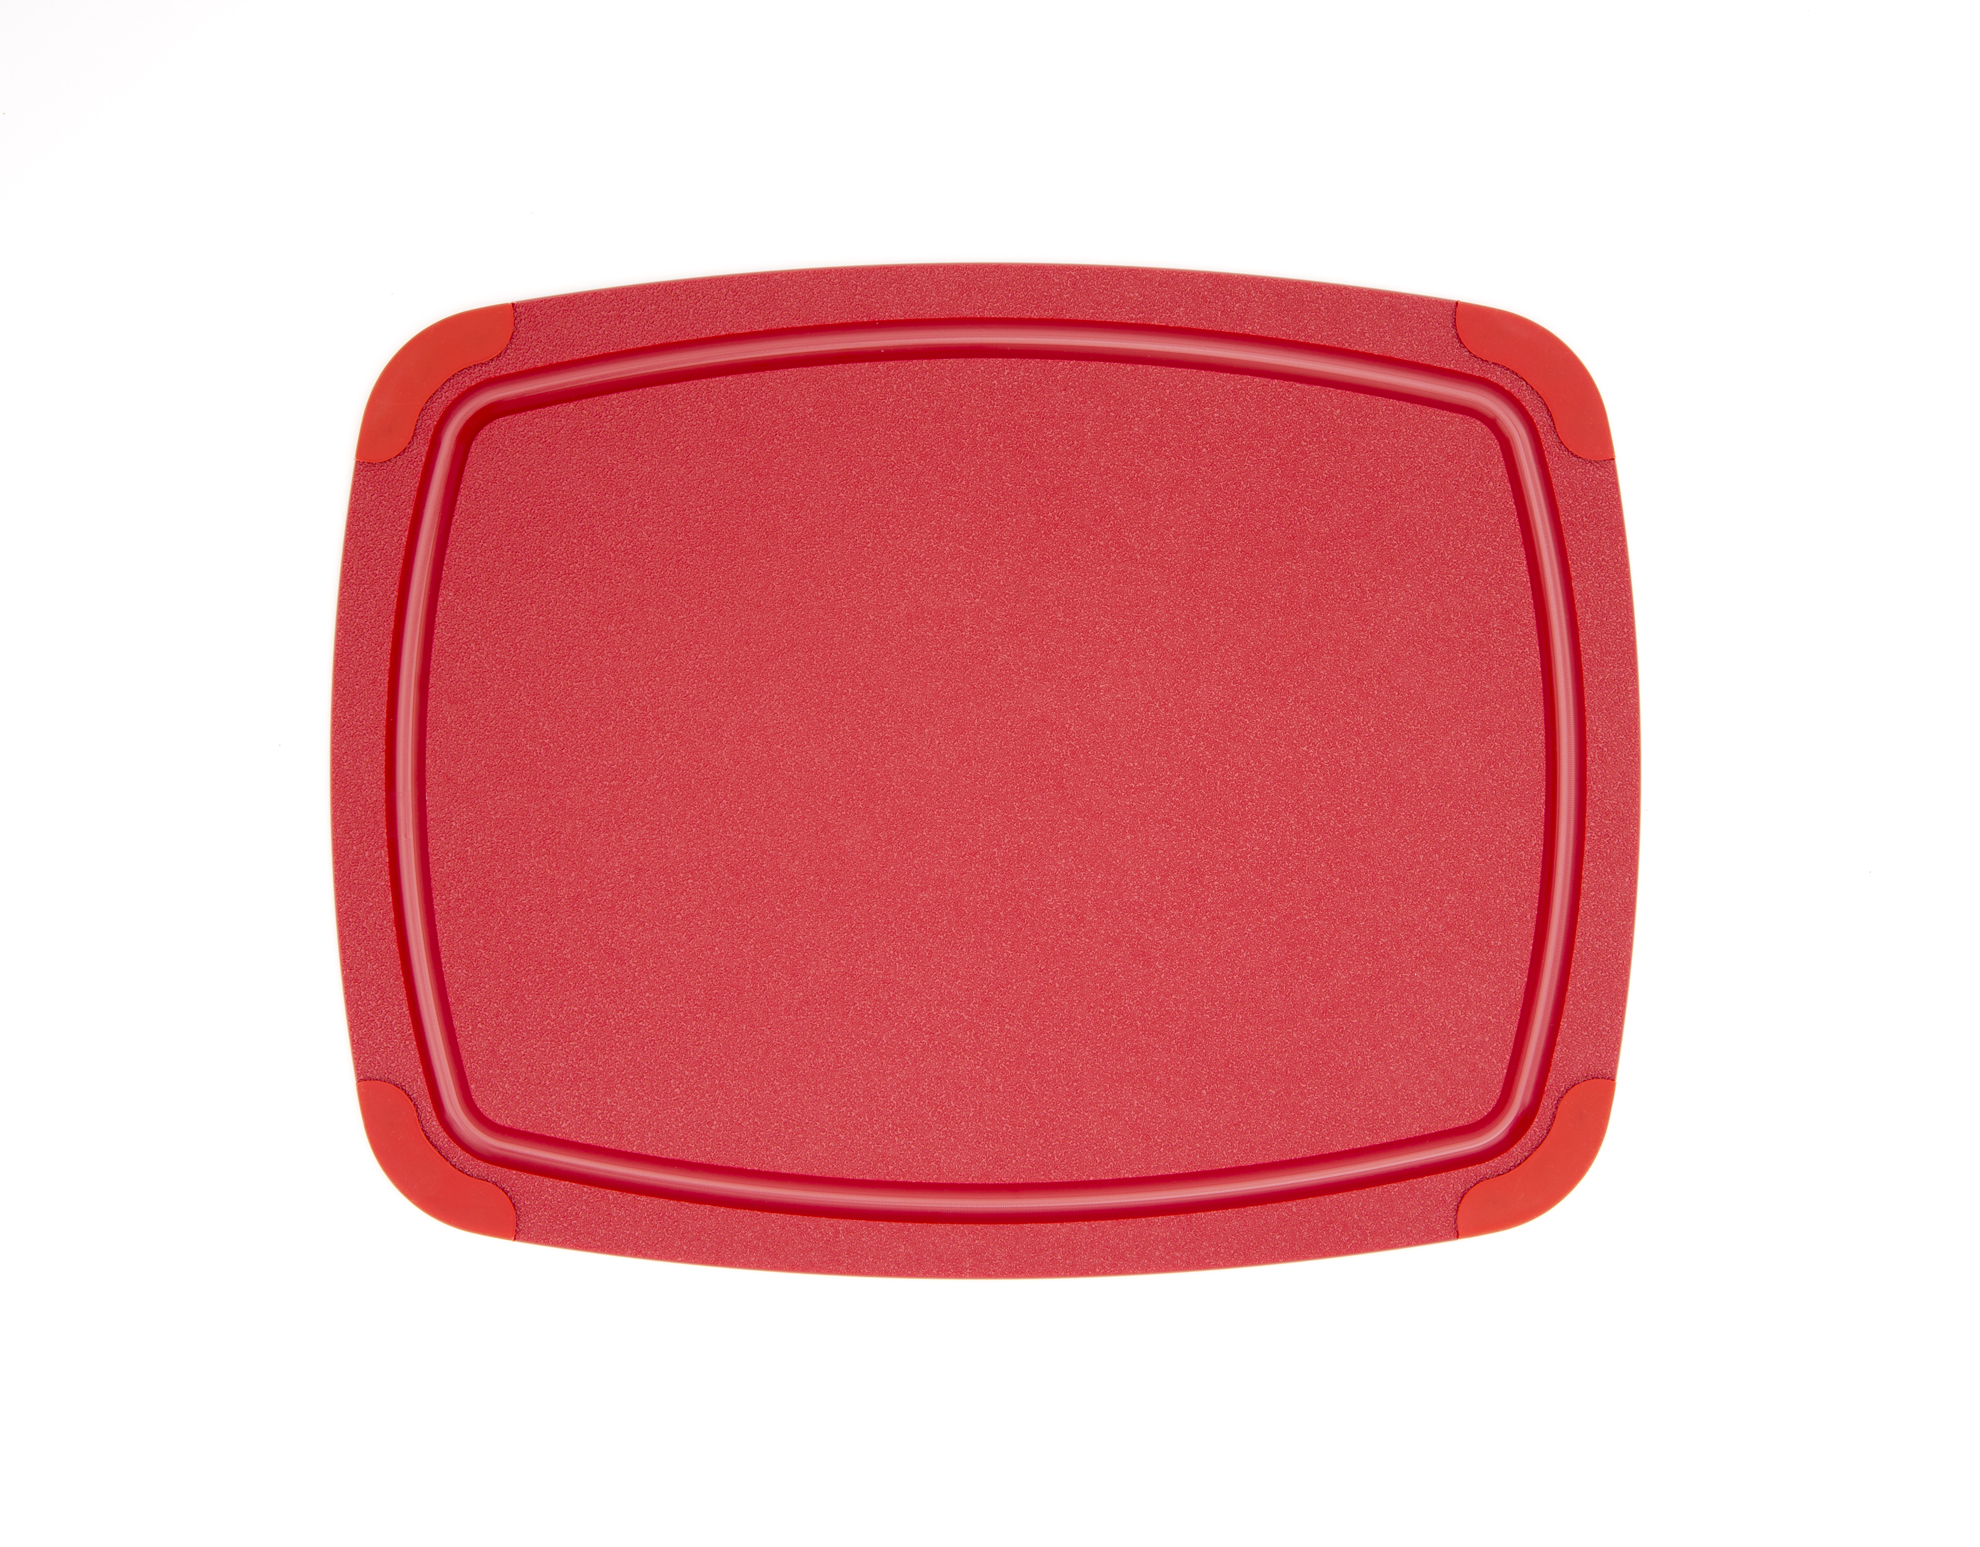 ecooks_MAIN-cutting board poly series-red-402151101